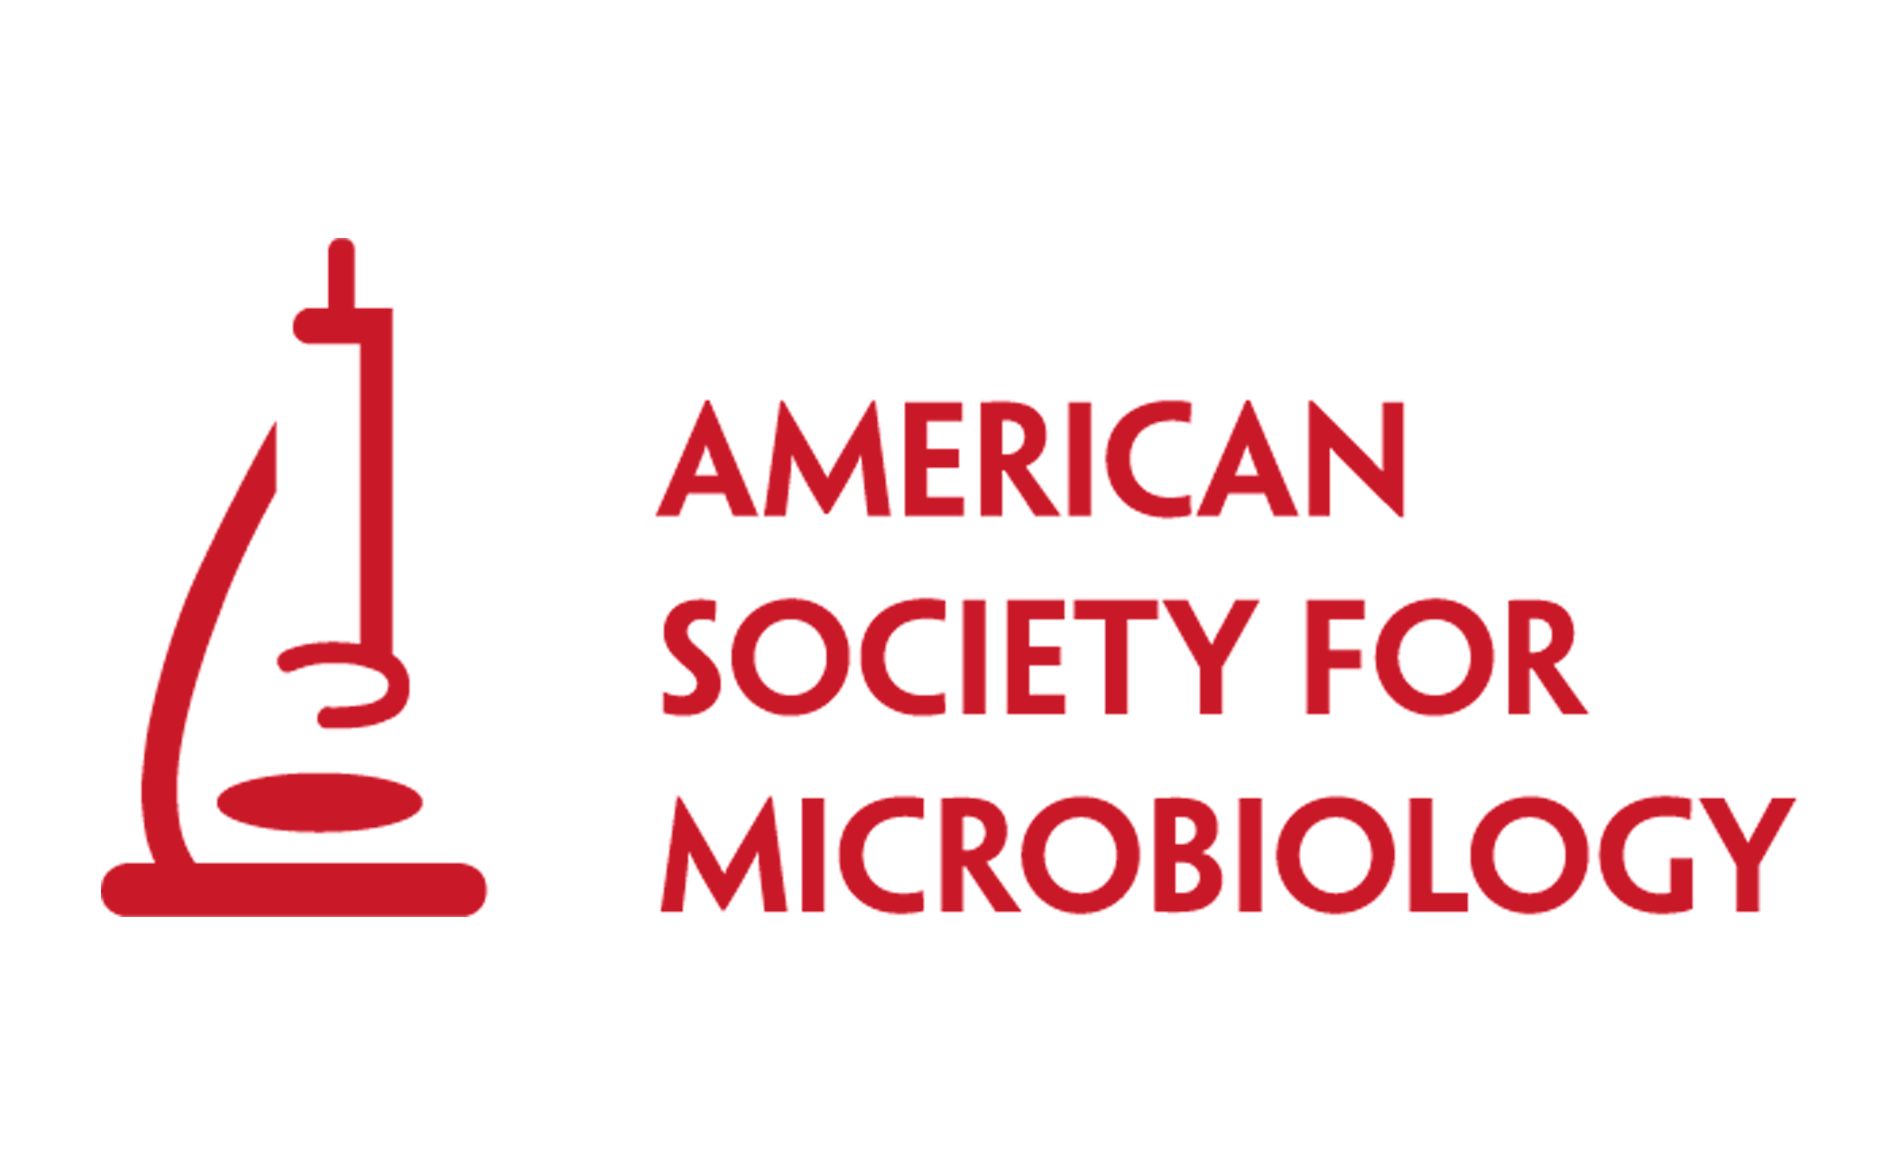 American Society for Microbiology Presentation